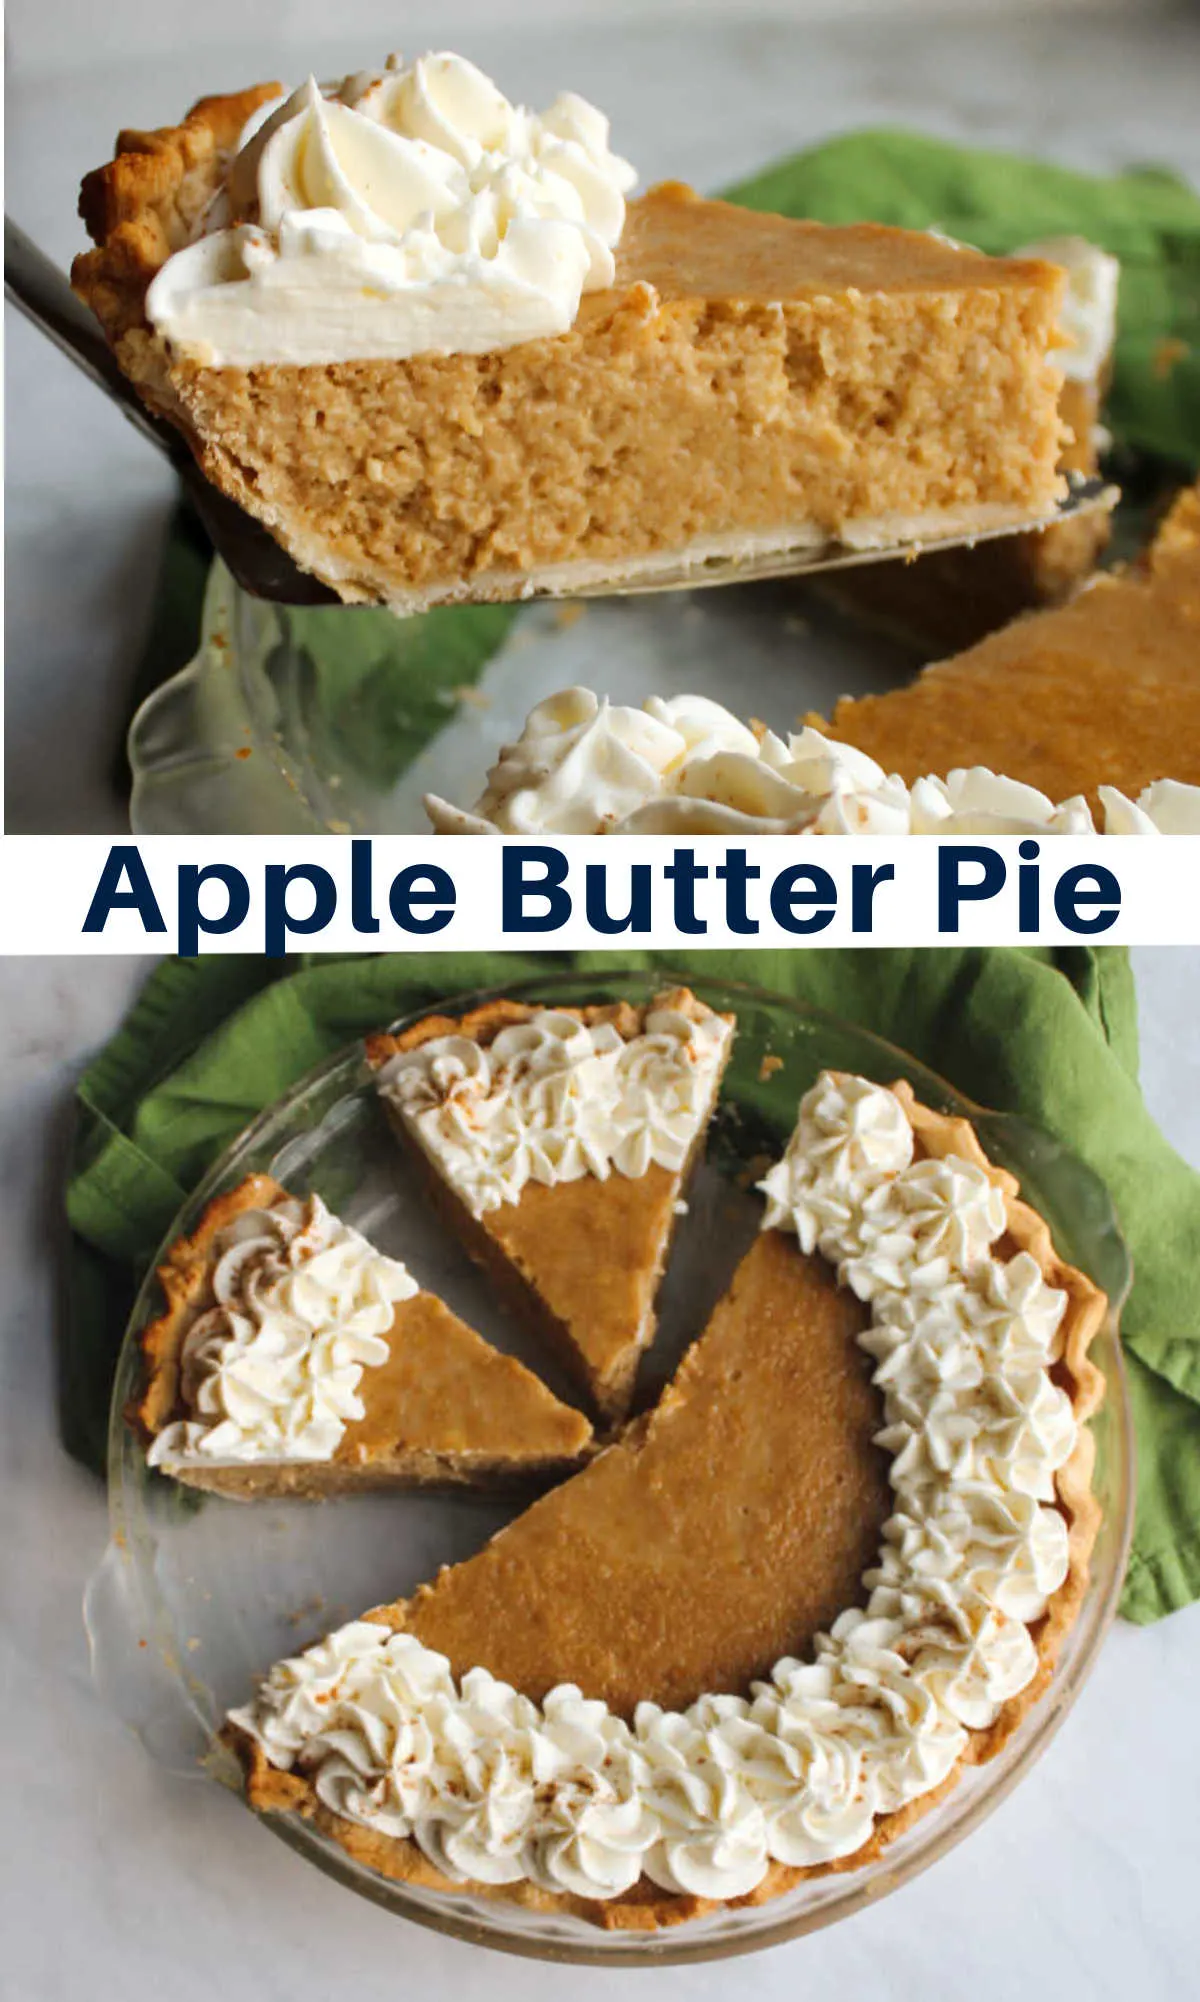 Creamy apple butter pie is silky and delicious. It has the texture of pumpkin pie, but with the flavor of apples and goodness of sweetened condensed milk instead!